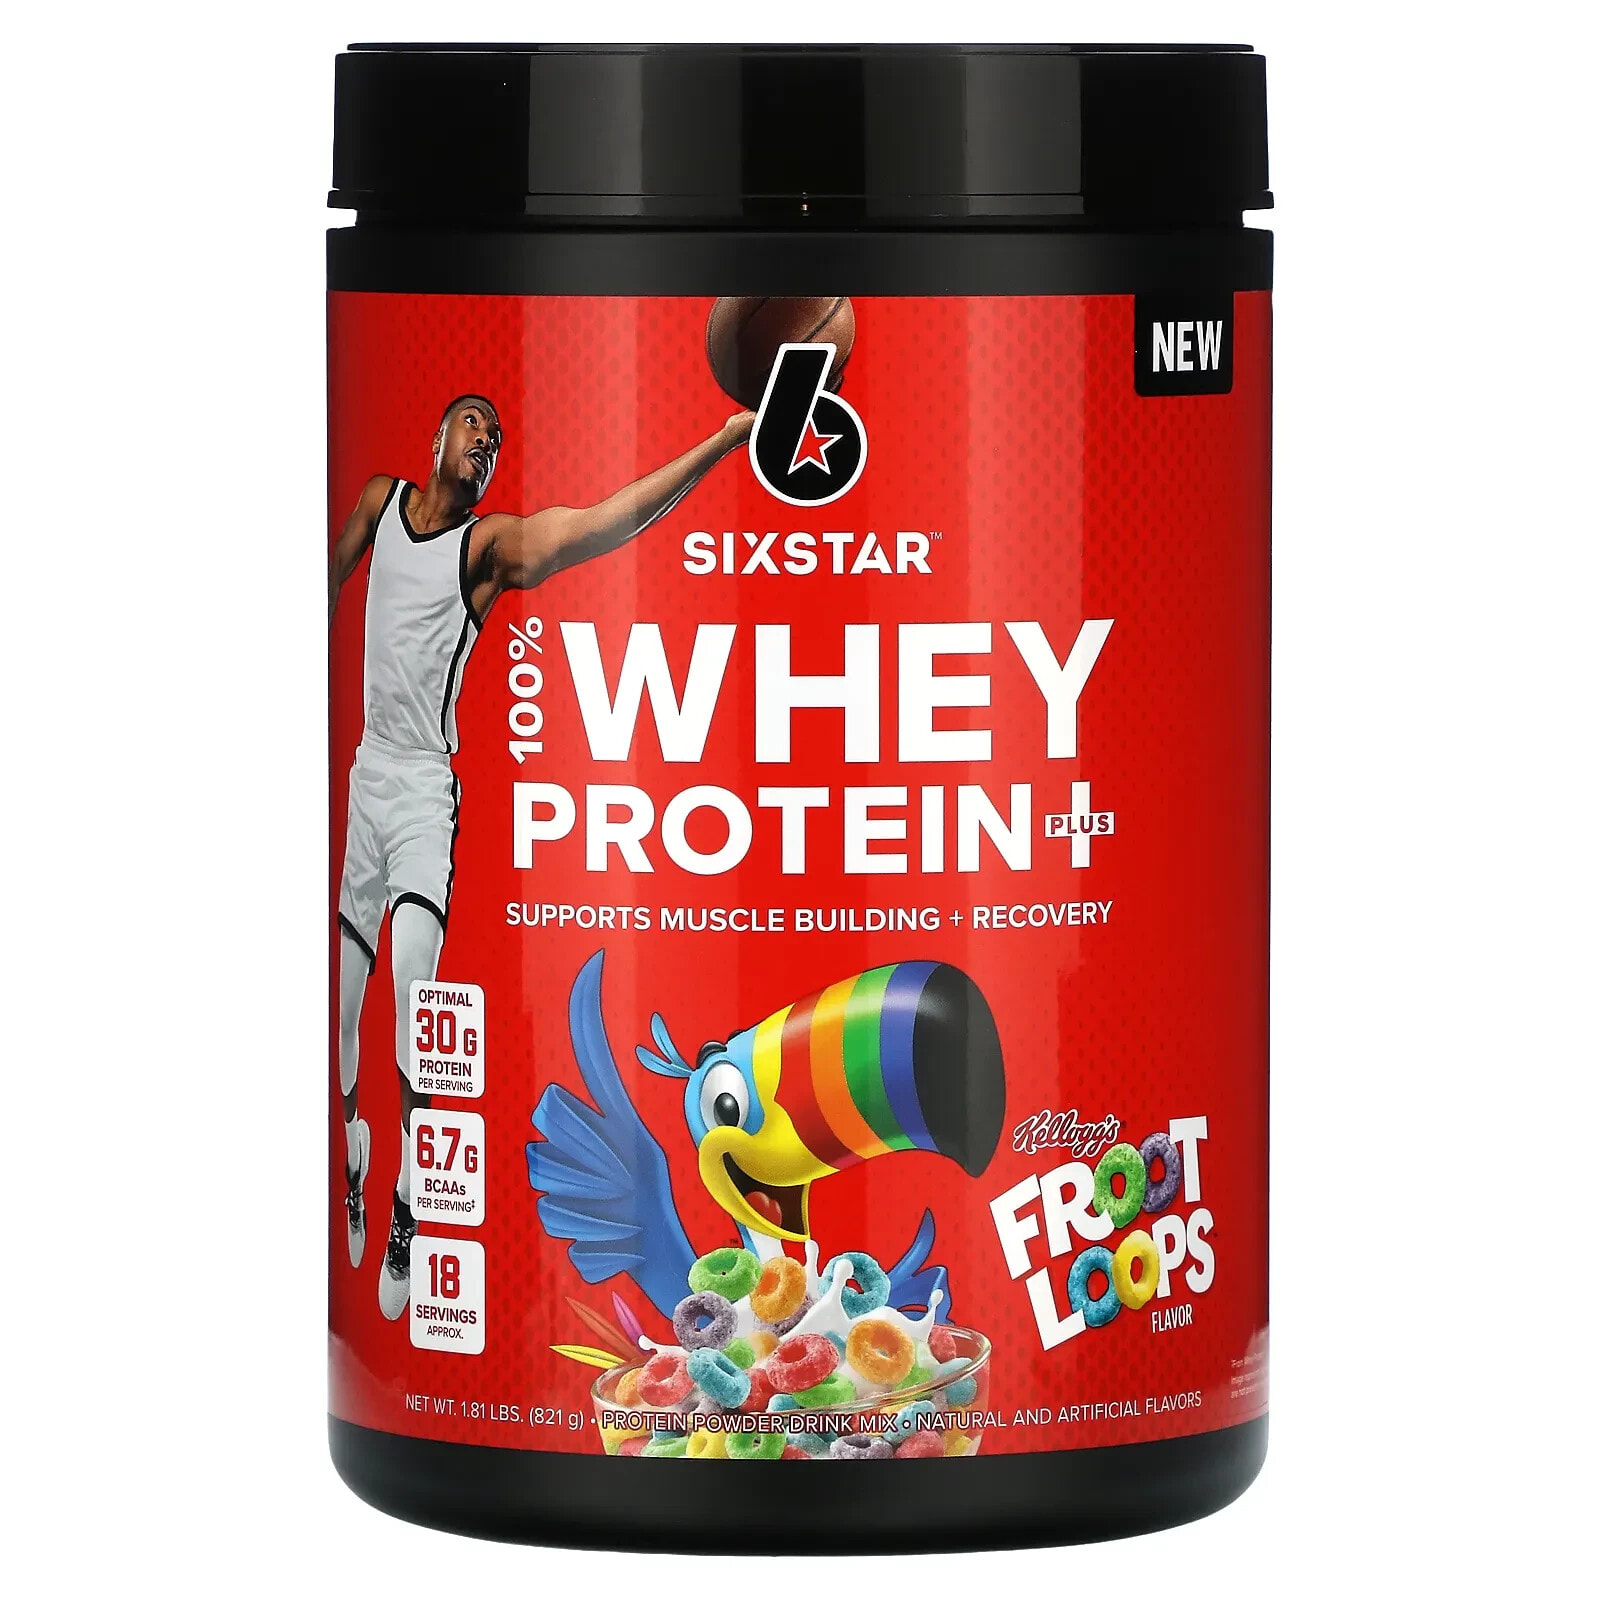 100% Whey Protein Plus, Kellogg's Froot Loops, 1.81 lbs (821 g)